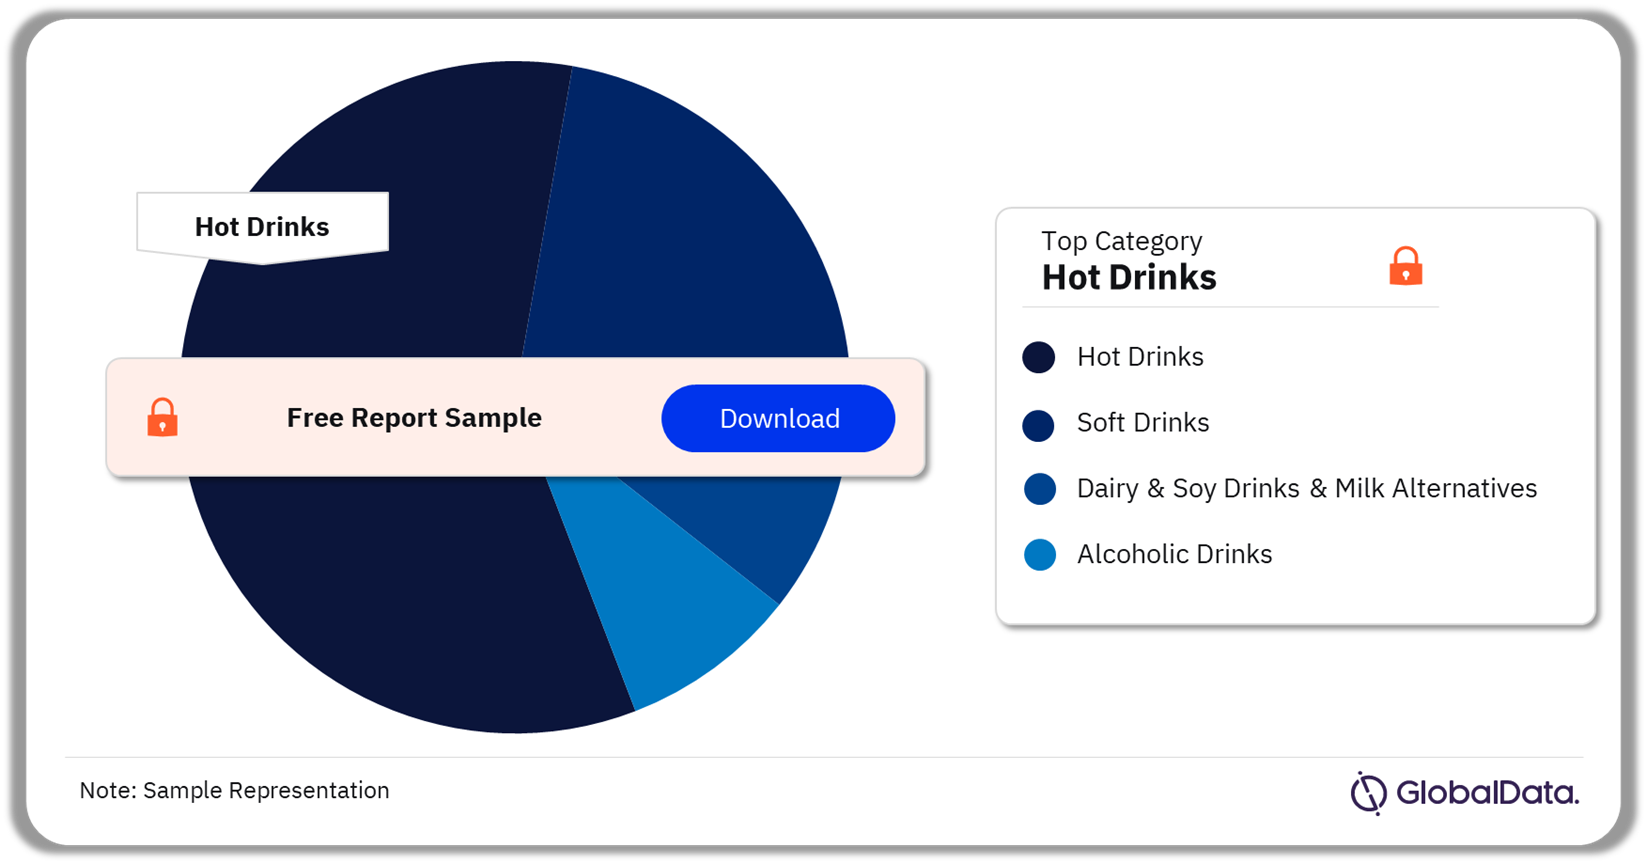 Dominican Republic Beverages Market Analysis by Categories, Q4 2023 (%)